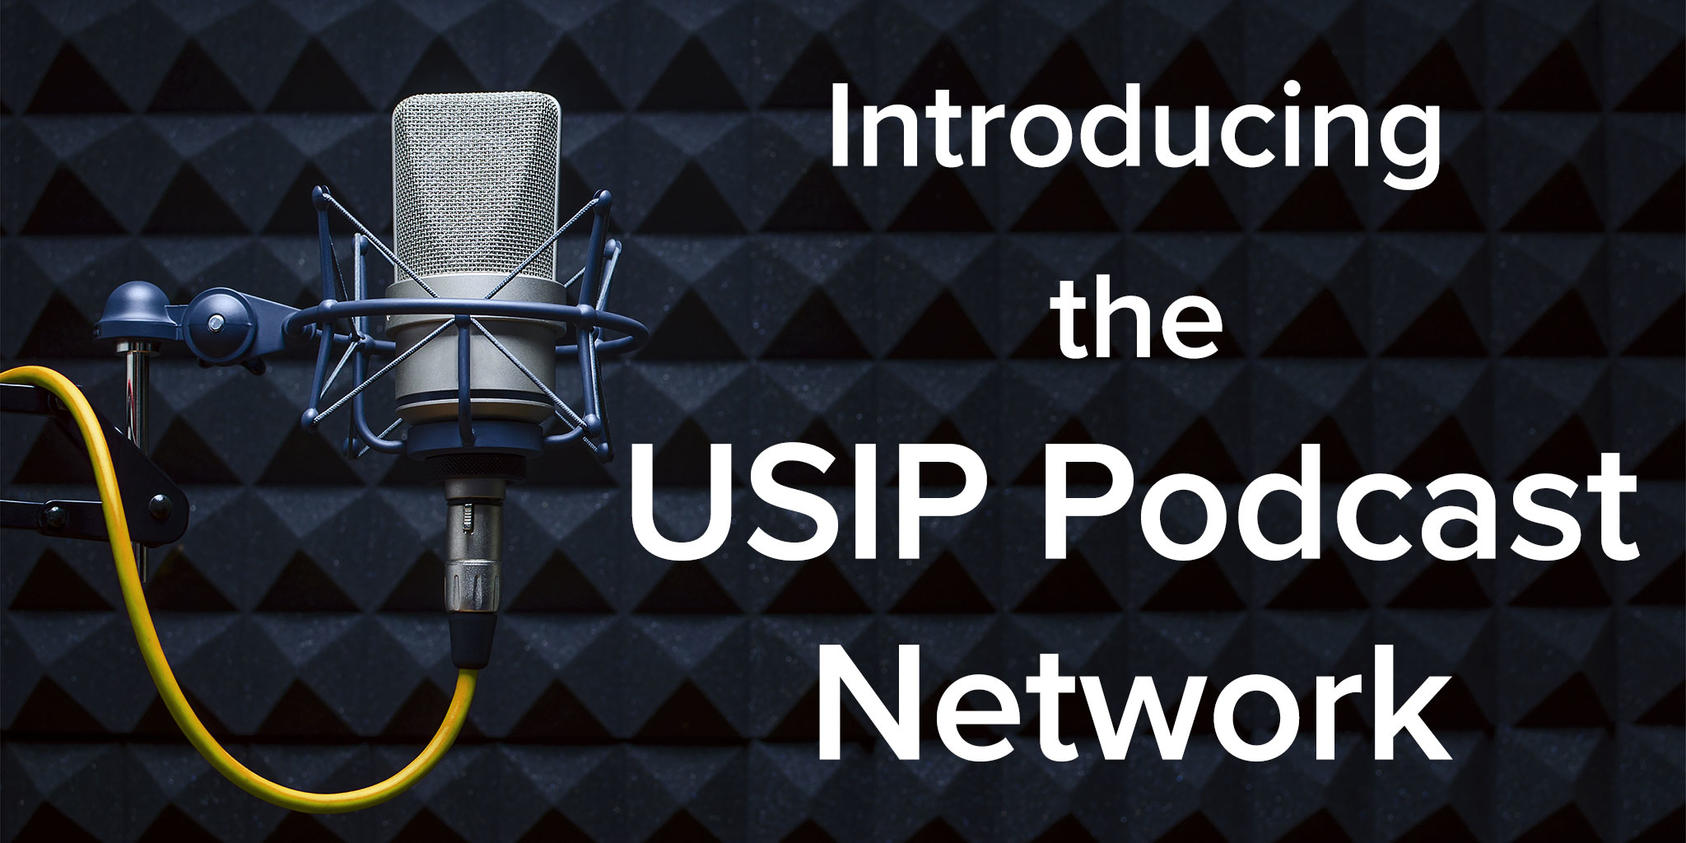 USIP Podcast Network